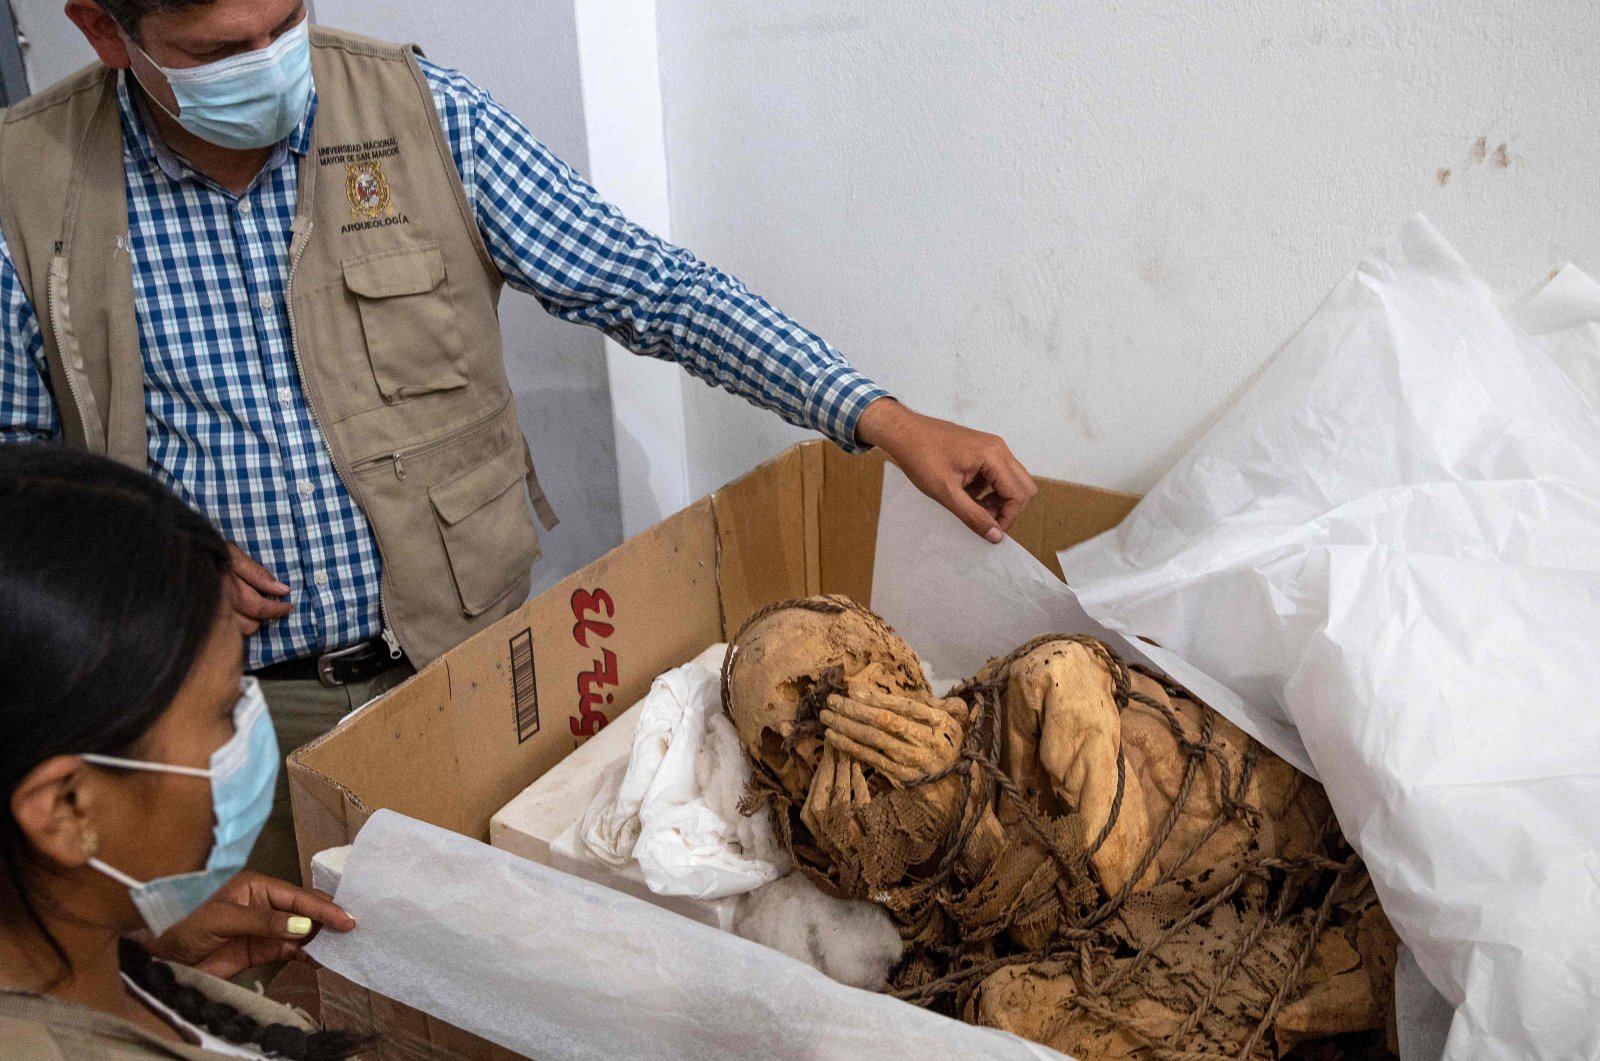 Archaeologist Pieter Van Dalen Luna (L), head responsible for the Cajamarquilla Archeological project shows, next to archaeologist Yomira Huamán, a mummy estimated to be between 800 and 1,200 years old, Lima, Peru, Nov. 30, 2021. (AFP Photo) 